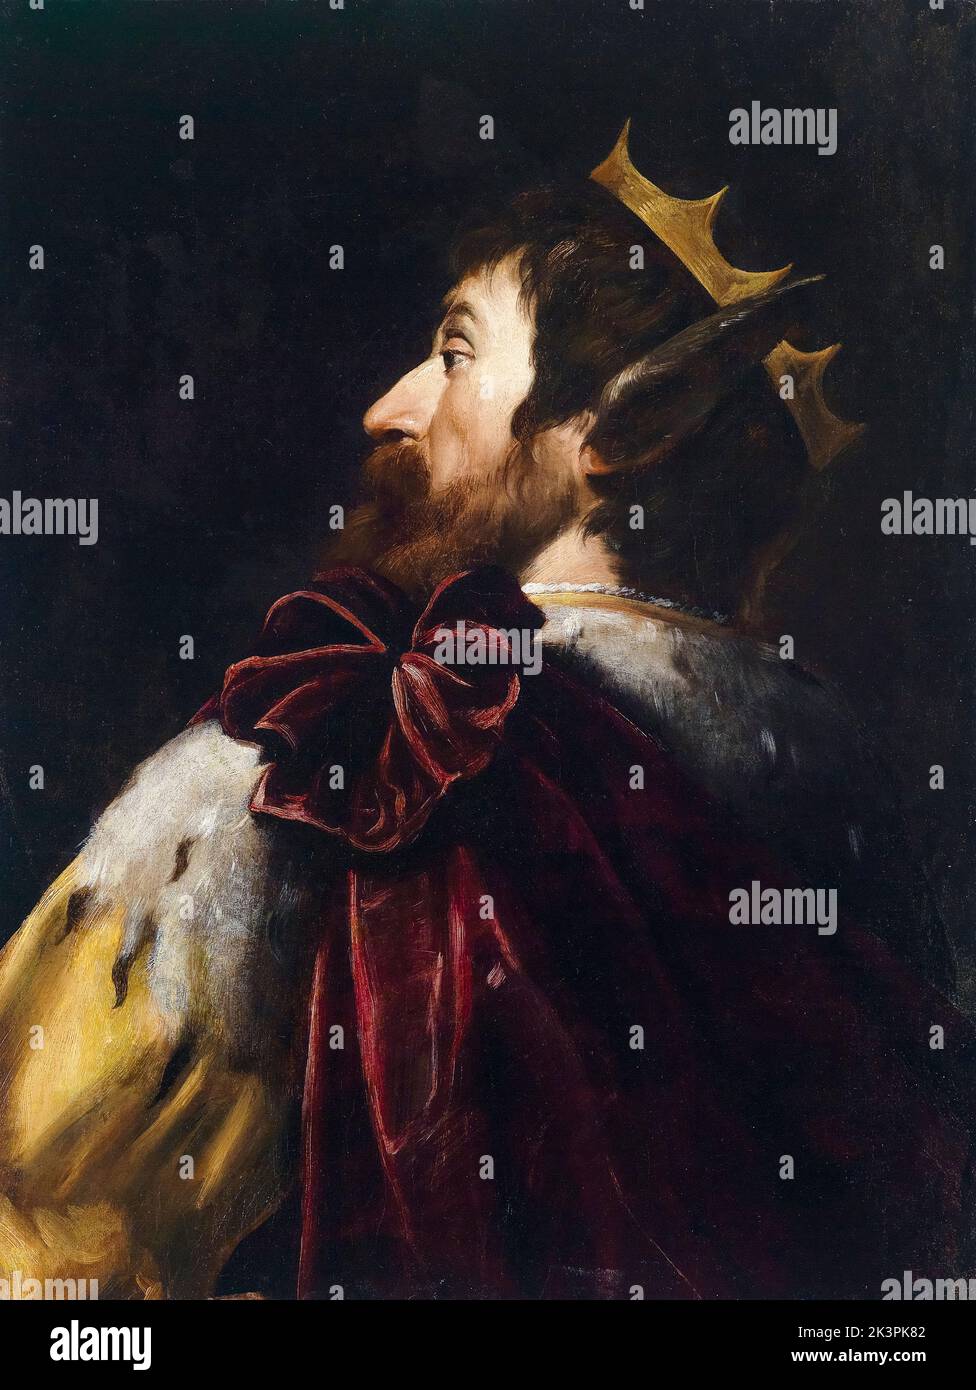 King Midas, portrait painting in oil on canvas by Andrea Vaccaro, before 1670 Stock Photo